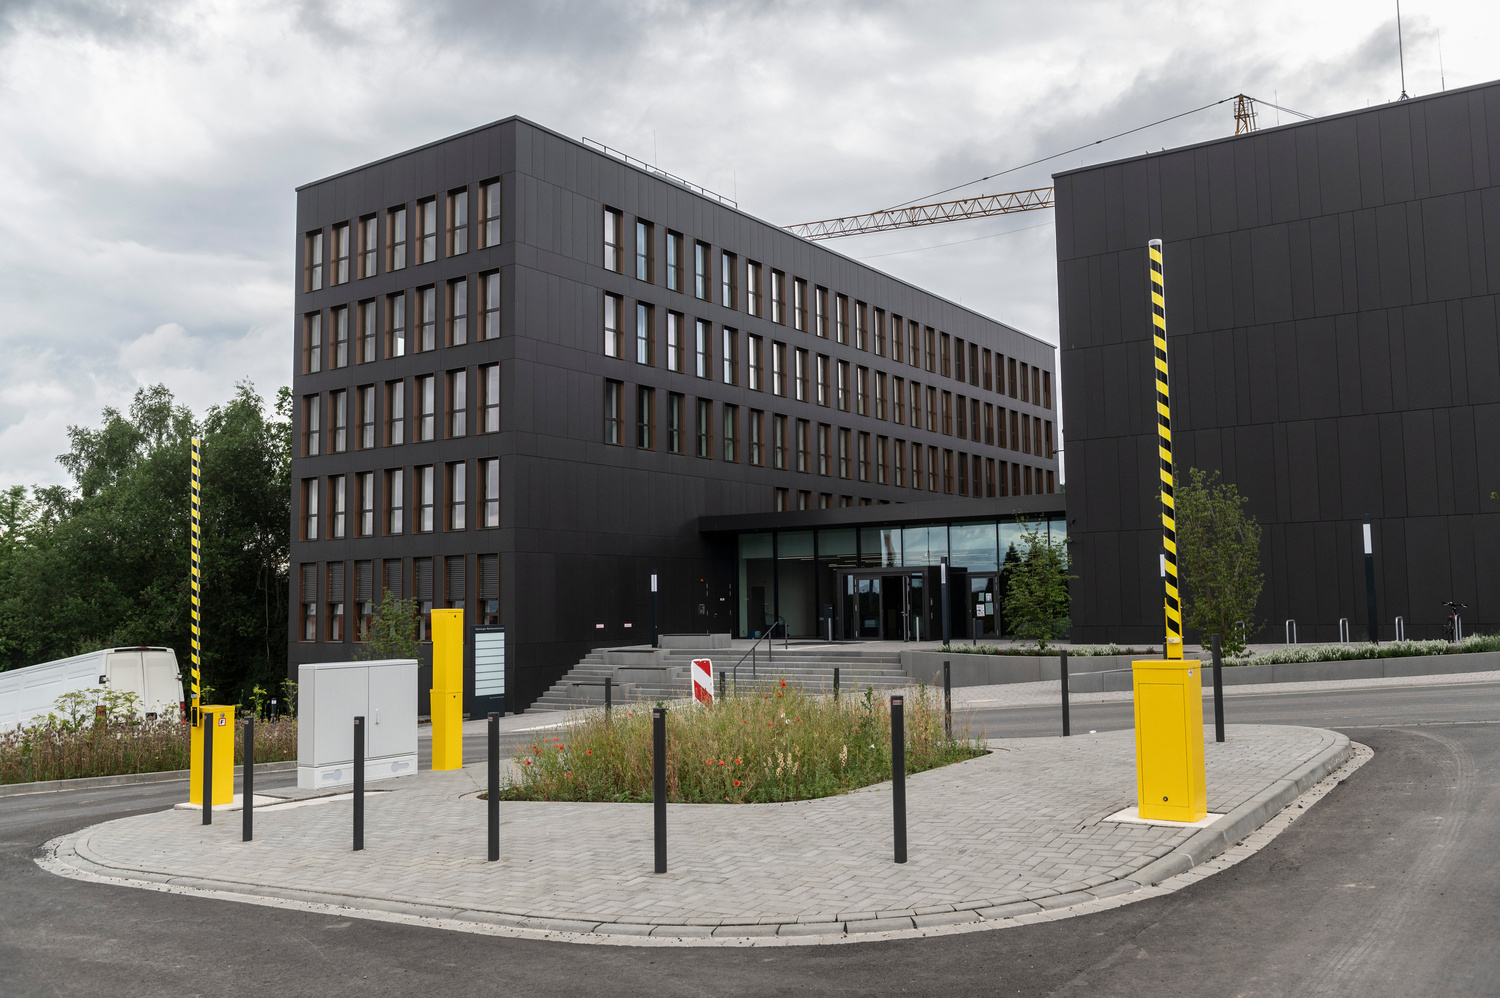 Göttingen University has handed over its largest new building project to date to its future users: after a symbolic handover of the keys, the Gesellschaft für wissenschaftliche Datenverarbeitung mbH Göttingen (GWDG) is now moving into the new joint computing centre for Göttingen.